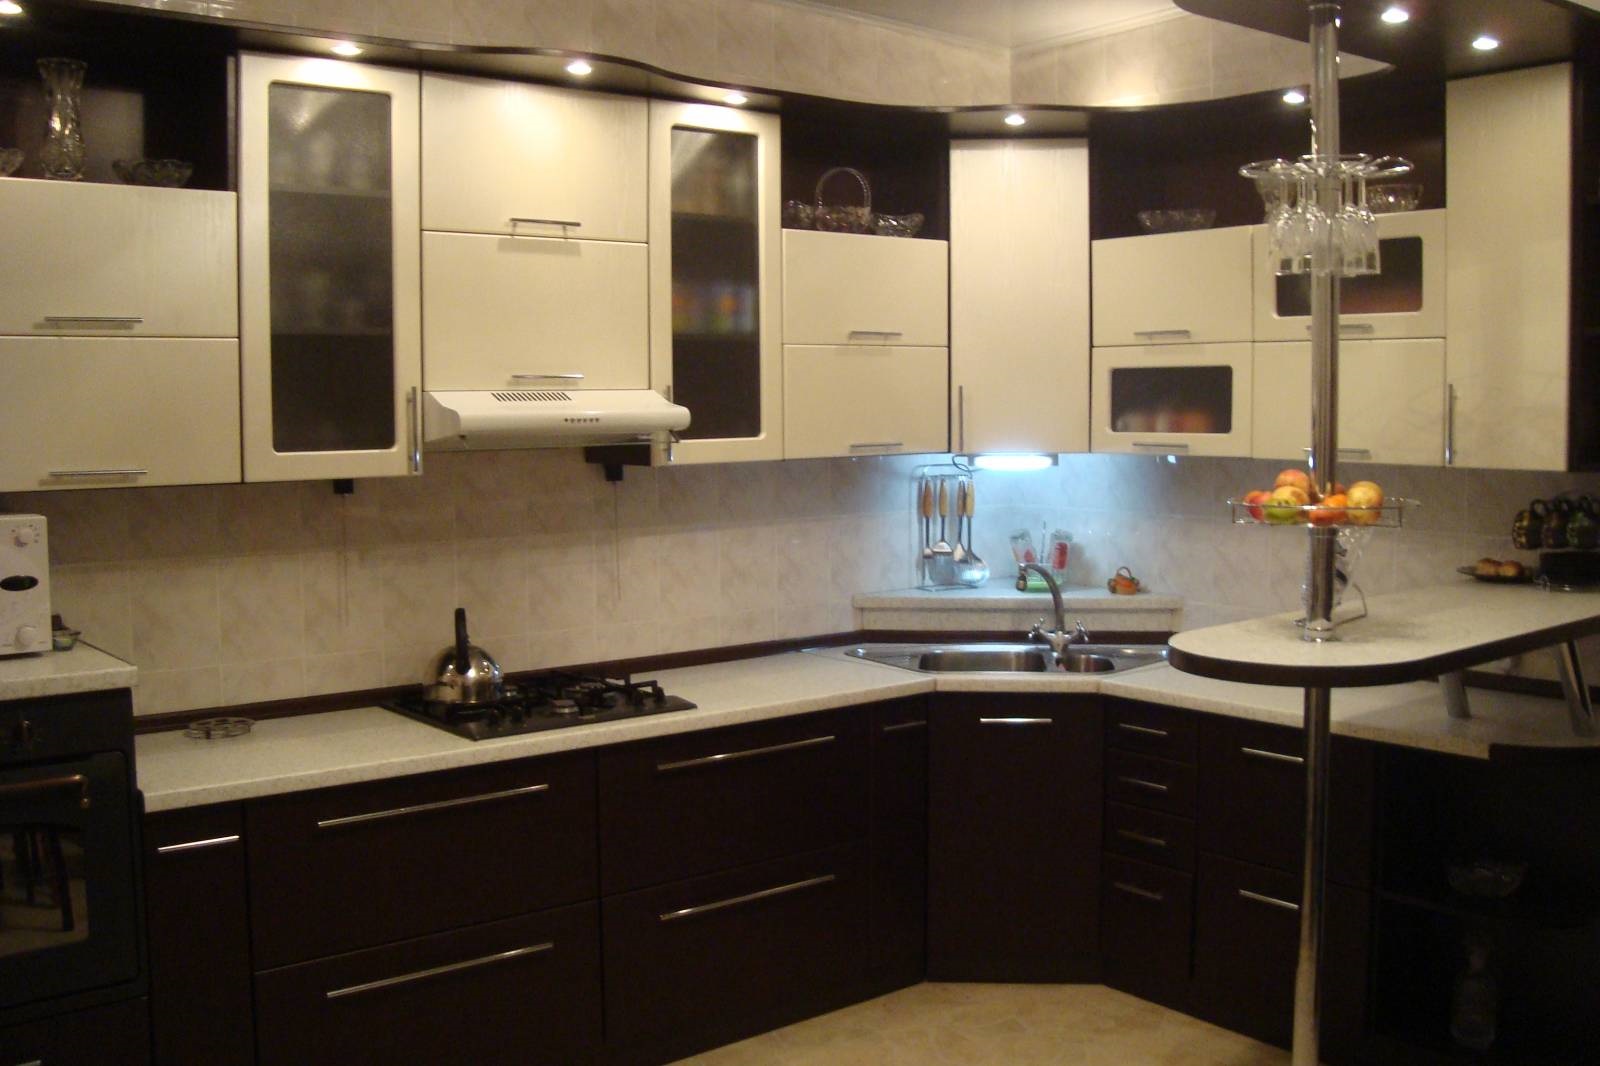 an example of an unusual corner kitchen interior